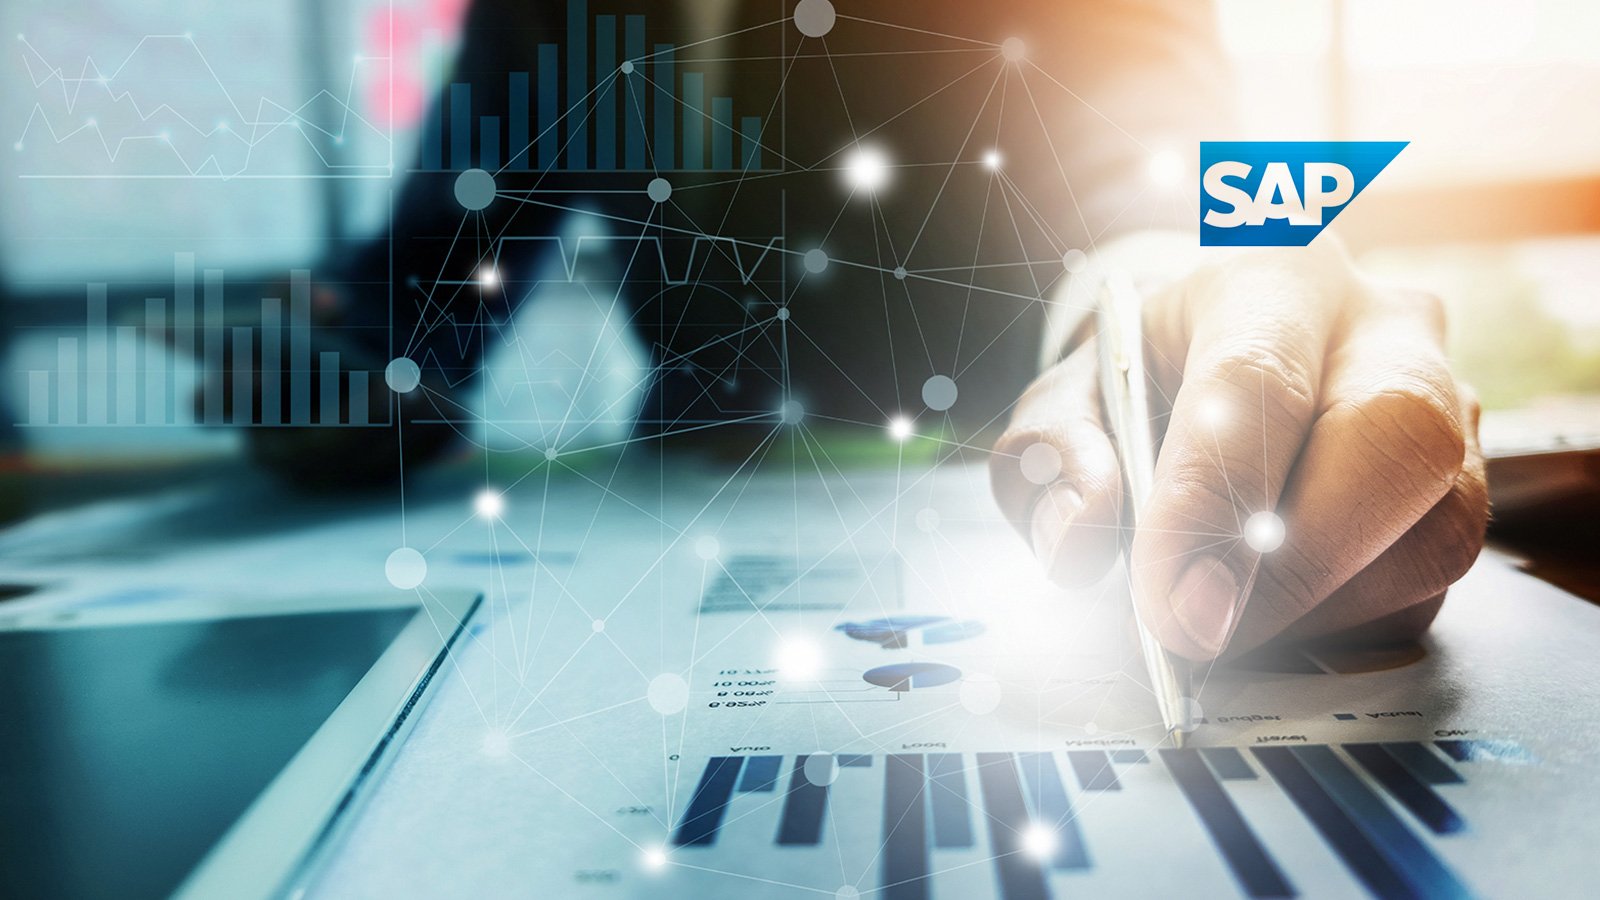 Free download SAP Extends Its Leadership in AI Powered Intelligent ERP with S4HANA [1600x900] for your Desktop, Mobile & Tablet. Explore SAP Wallpaper. SAP Wallpaper